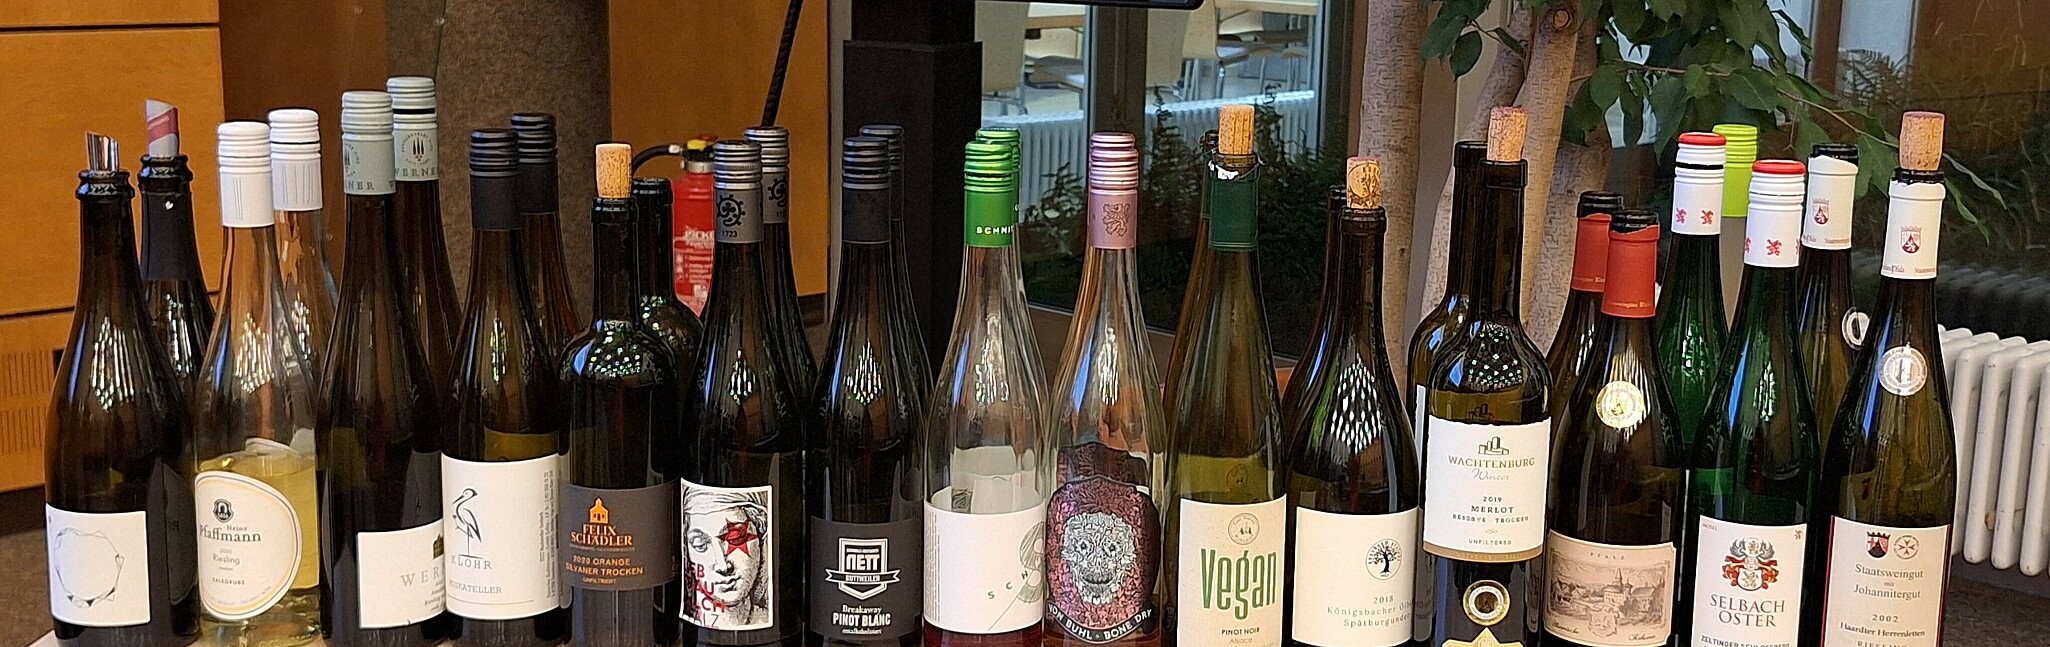 The variety of wines tasted at the Alumni Network Meeting was remarkable!